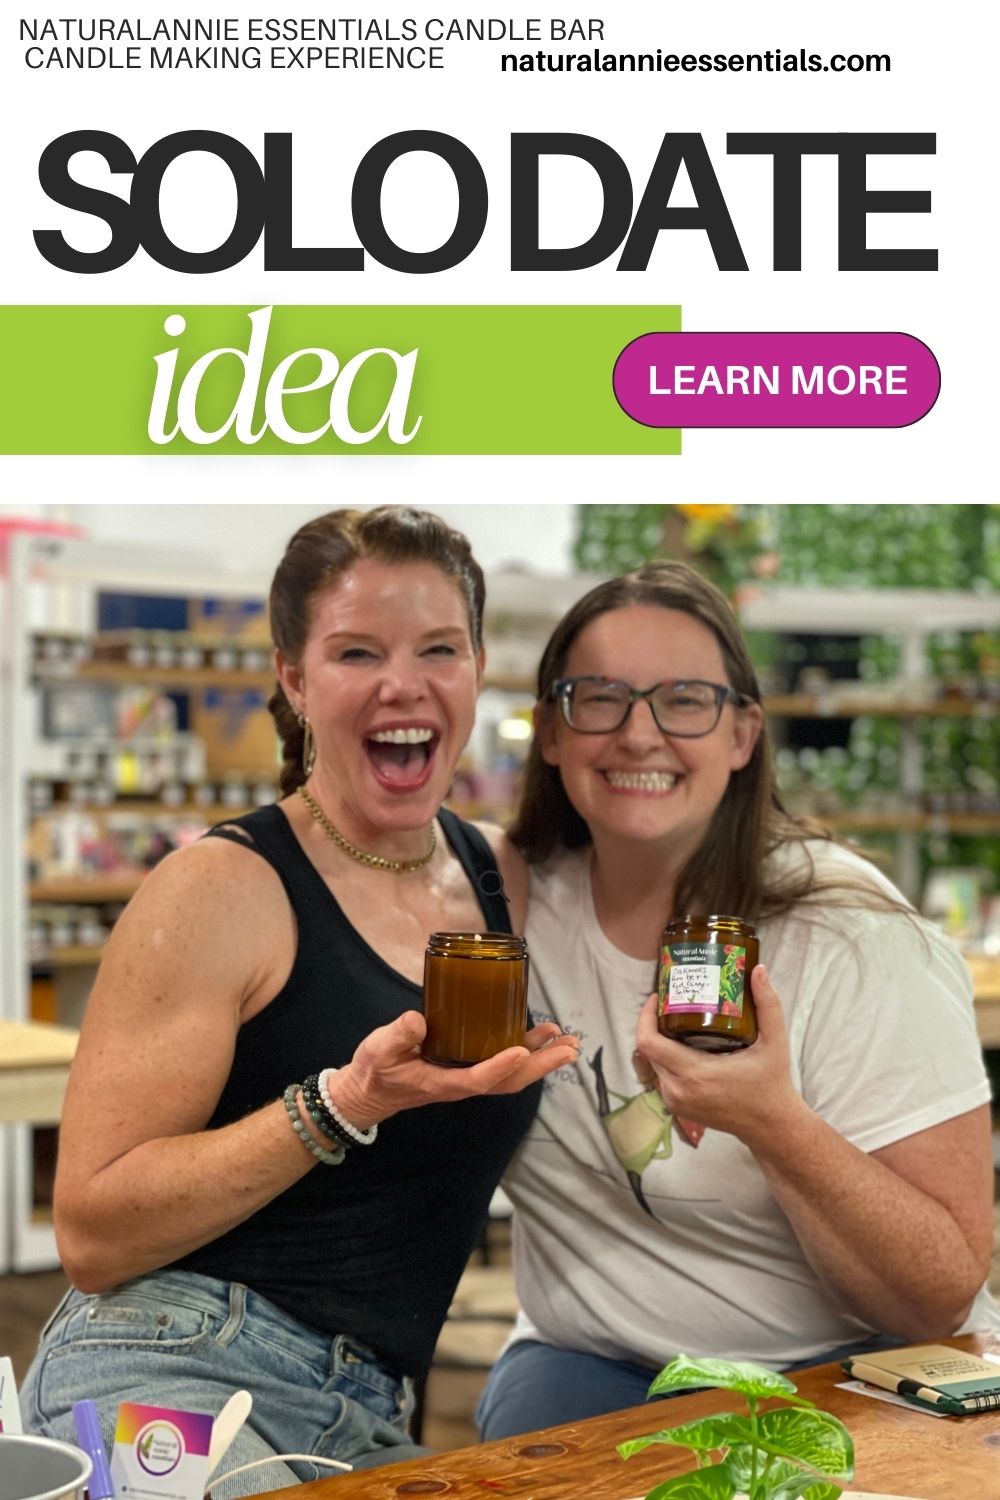 solo date idea candle making experience